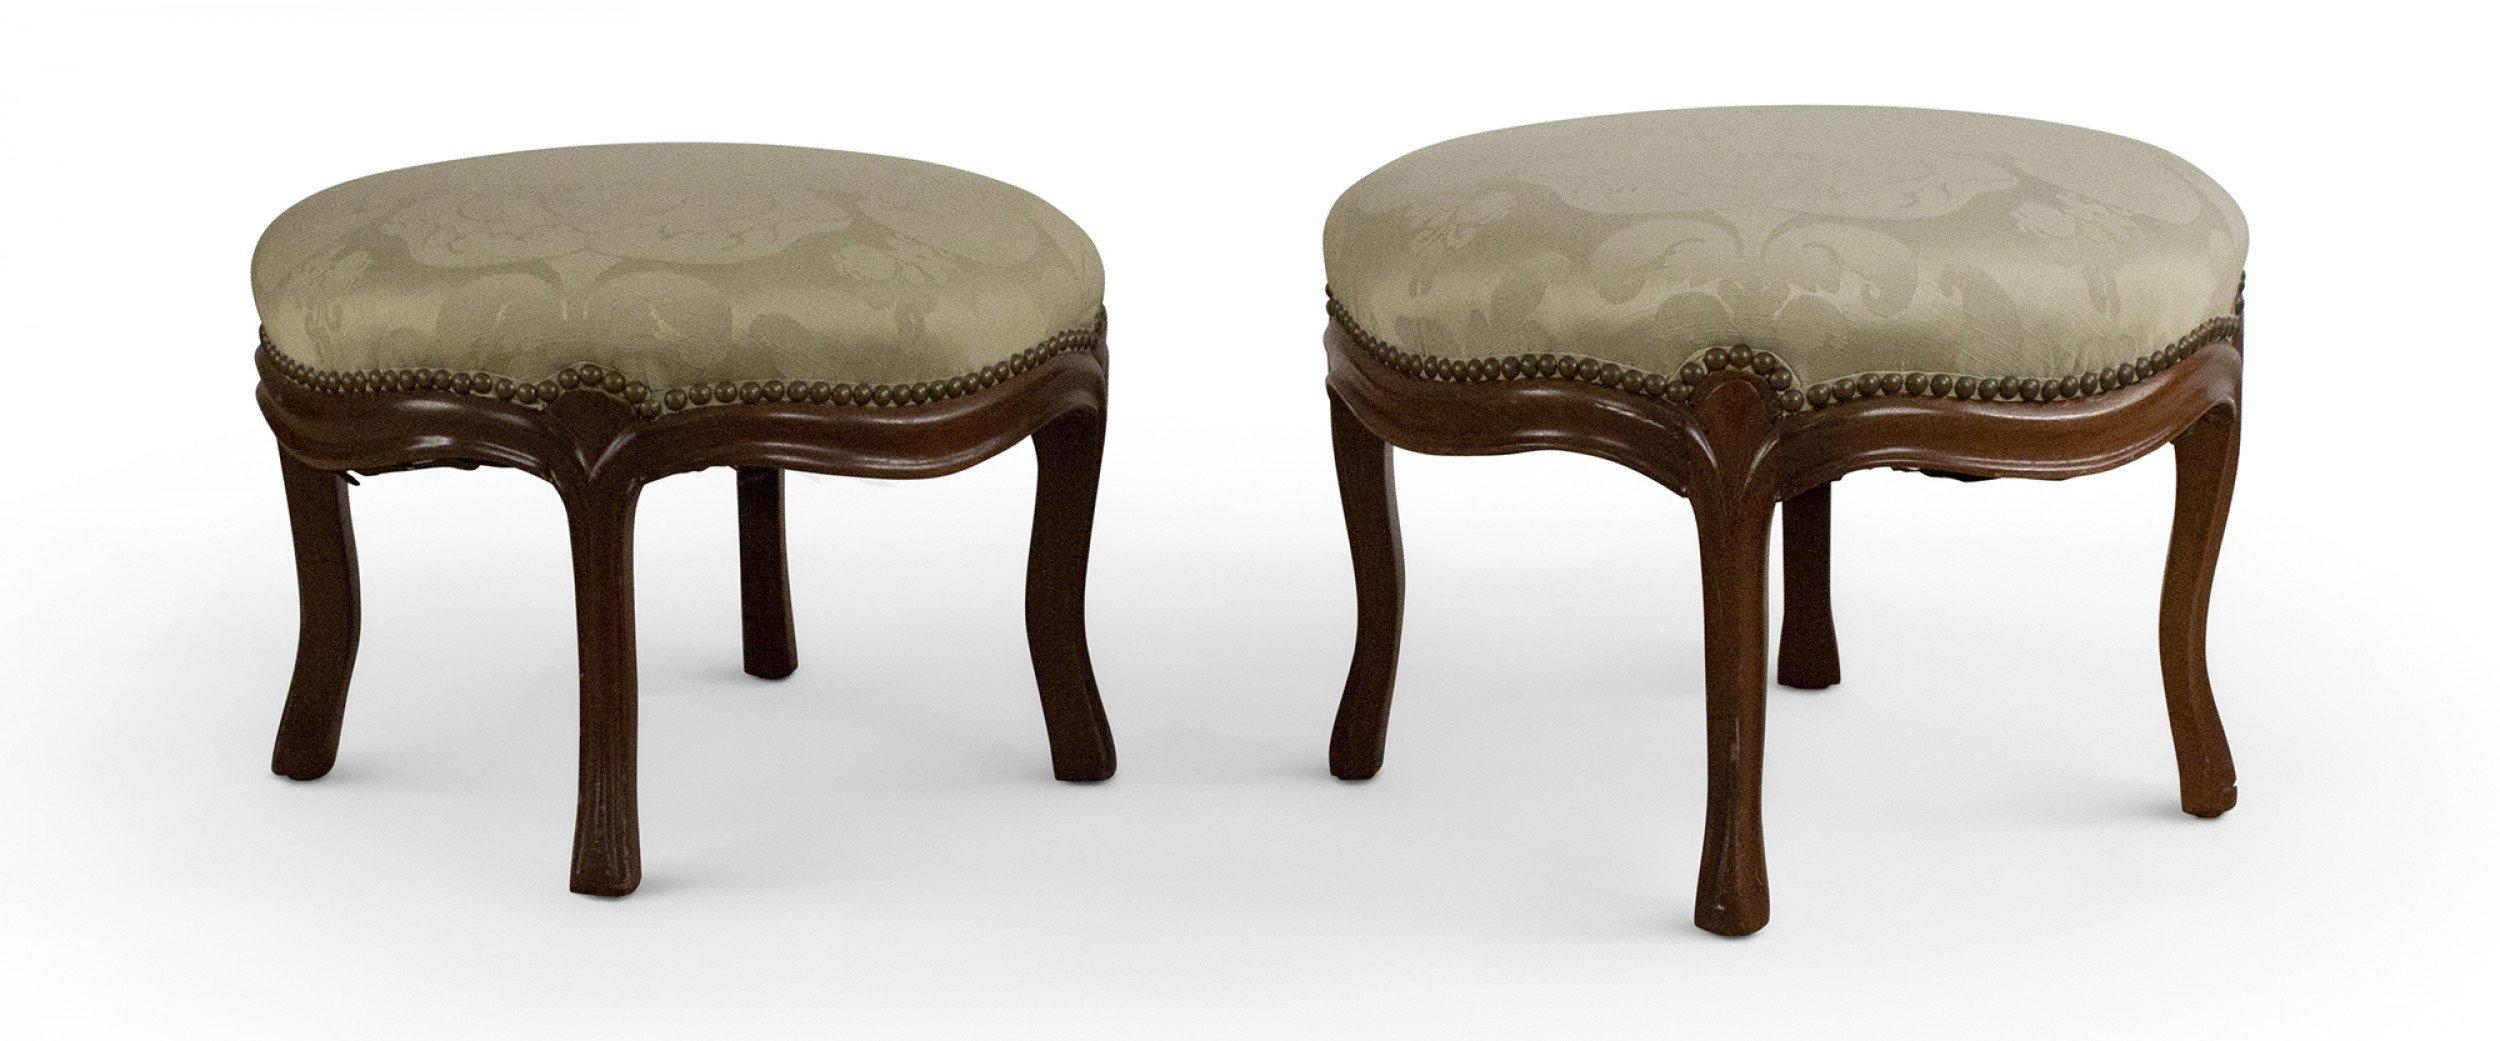 Pair of similar American Victorian footstools with carved walnut frames and light green damask upholstery with brass nail head trim. (priced as pair).
      